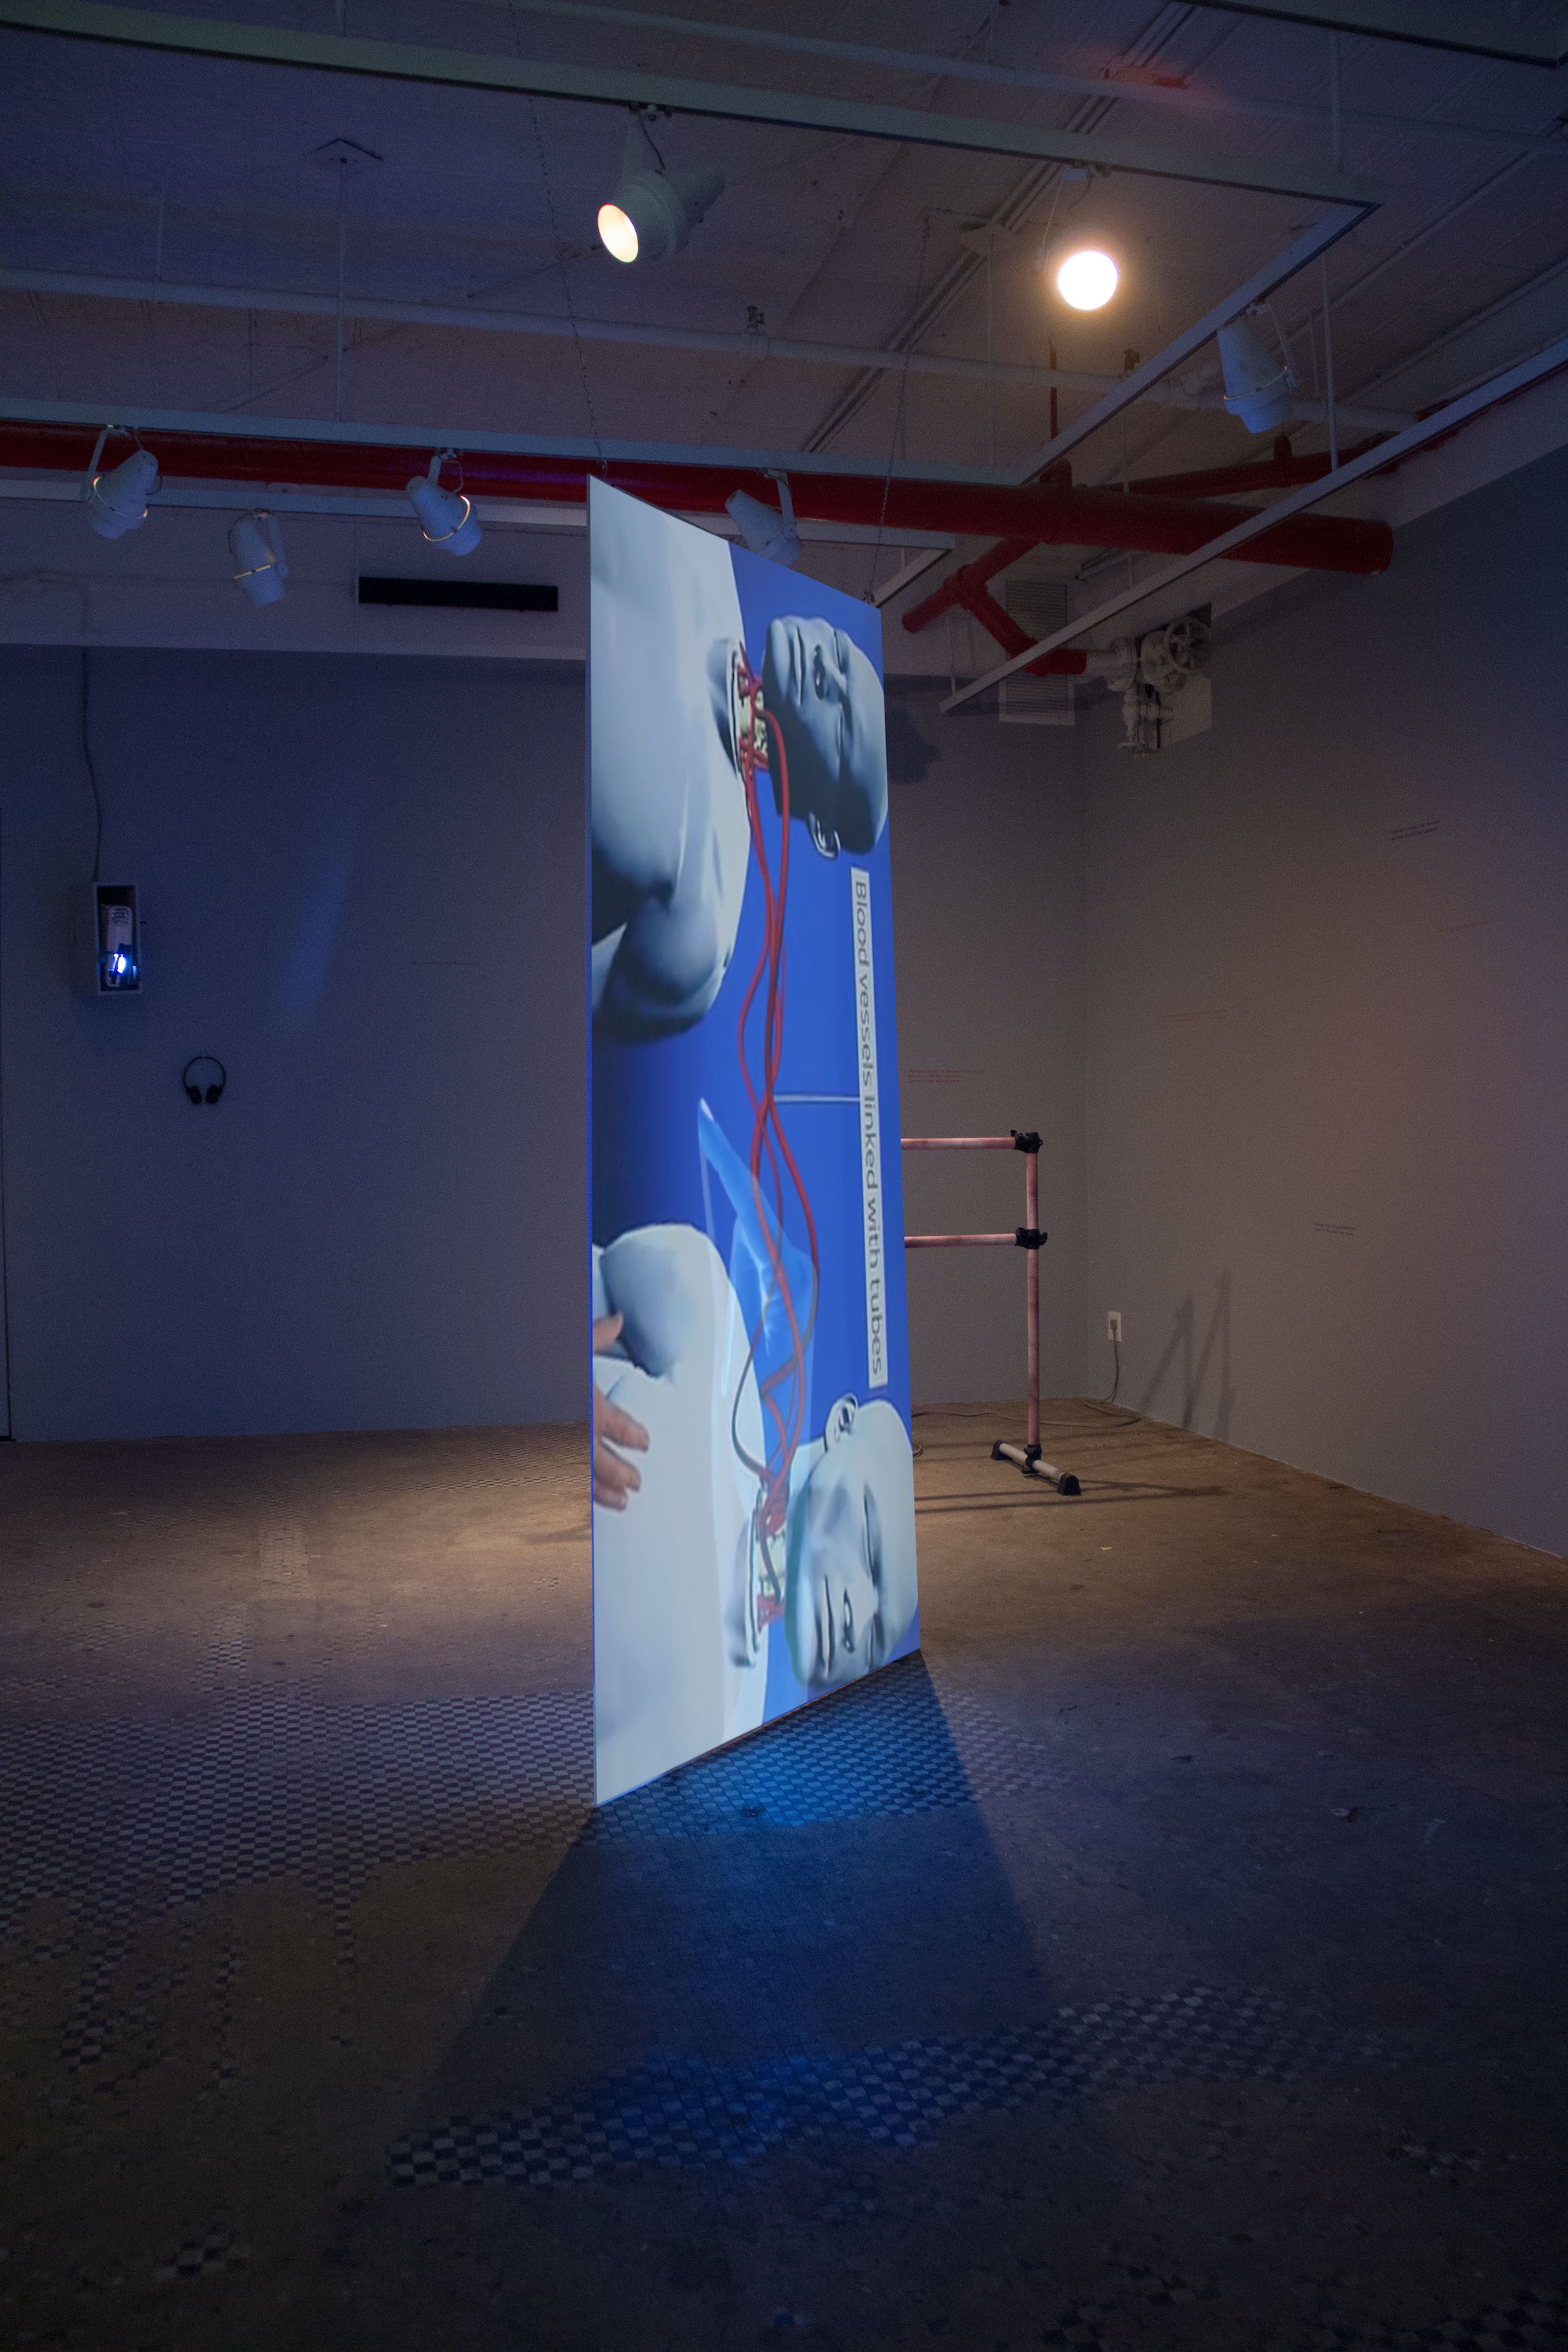 Janus, 2015 Named after the two-faced Roman god of passages and transitions, this video installation consists of two projectors representing the past and the future